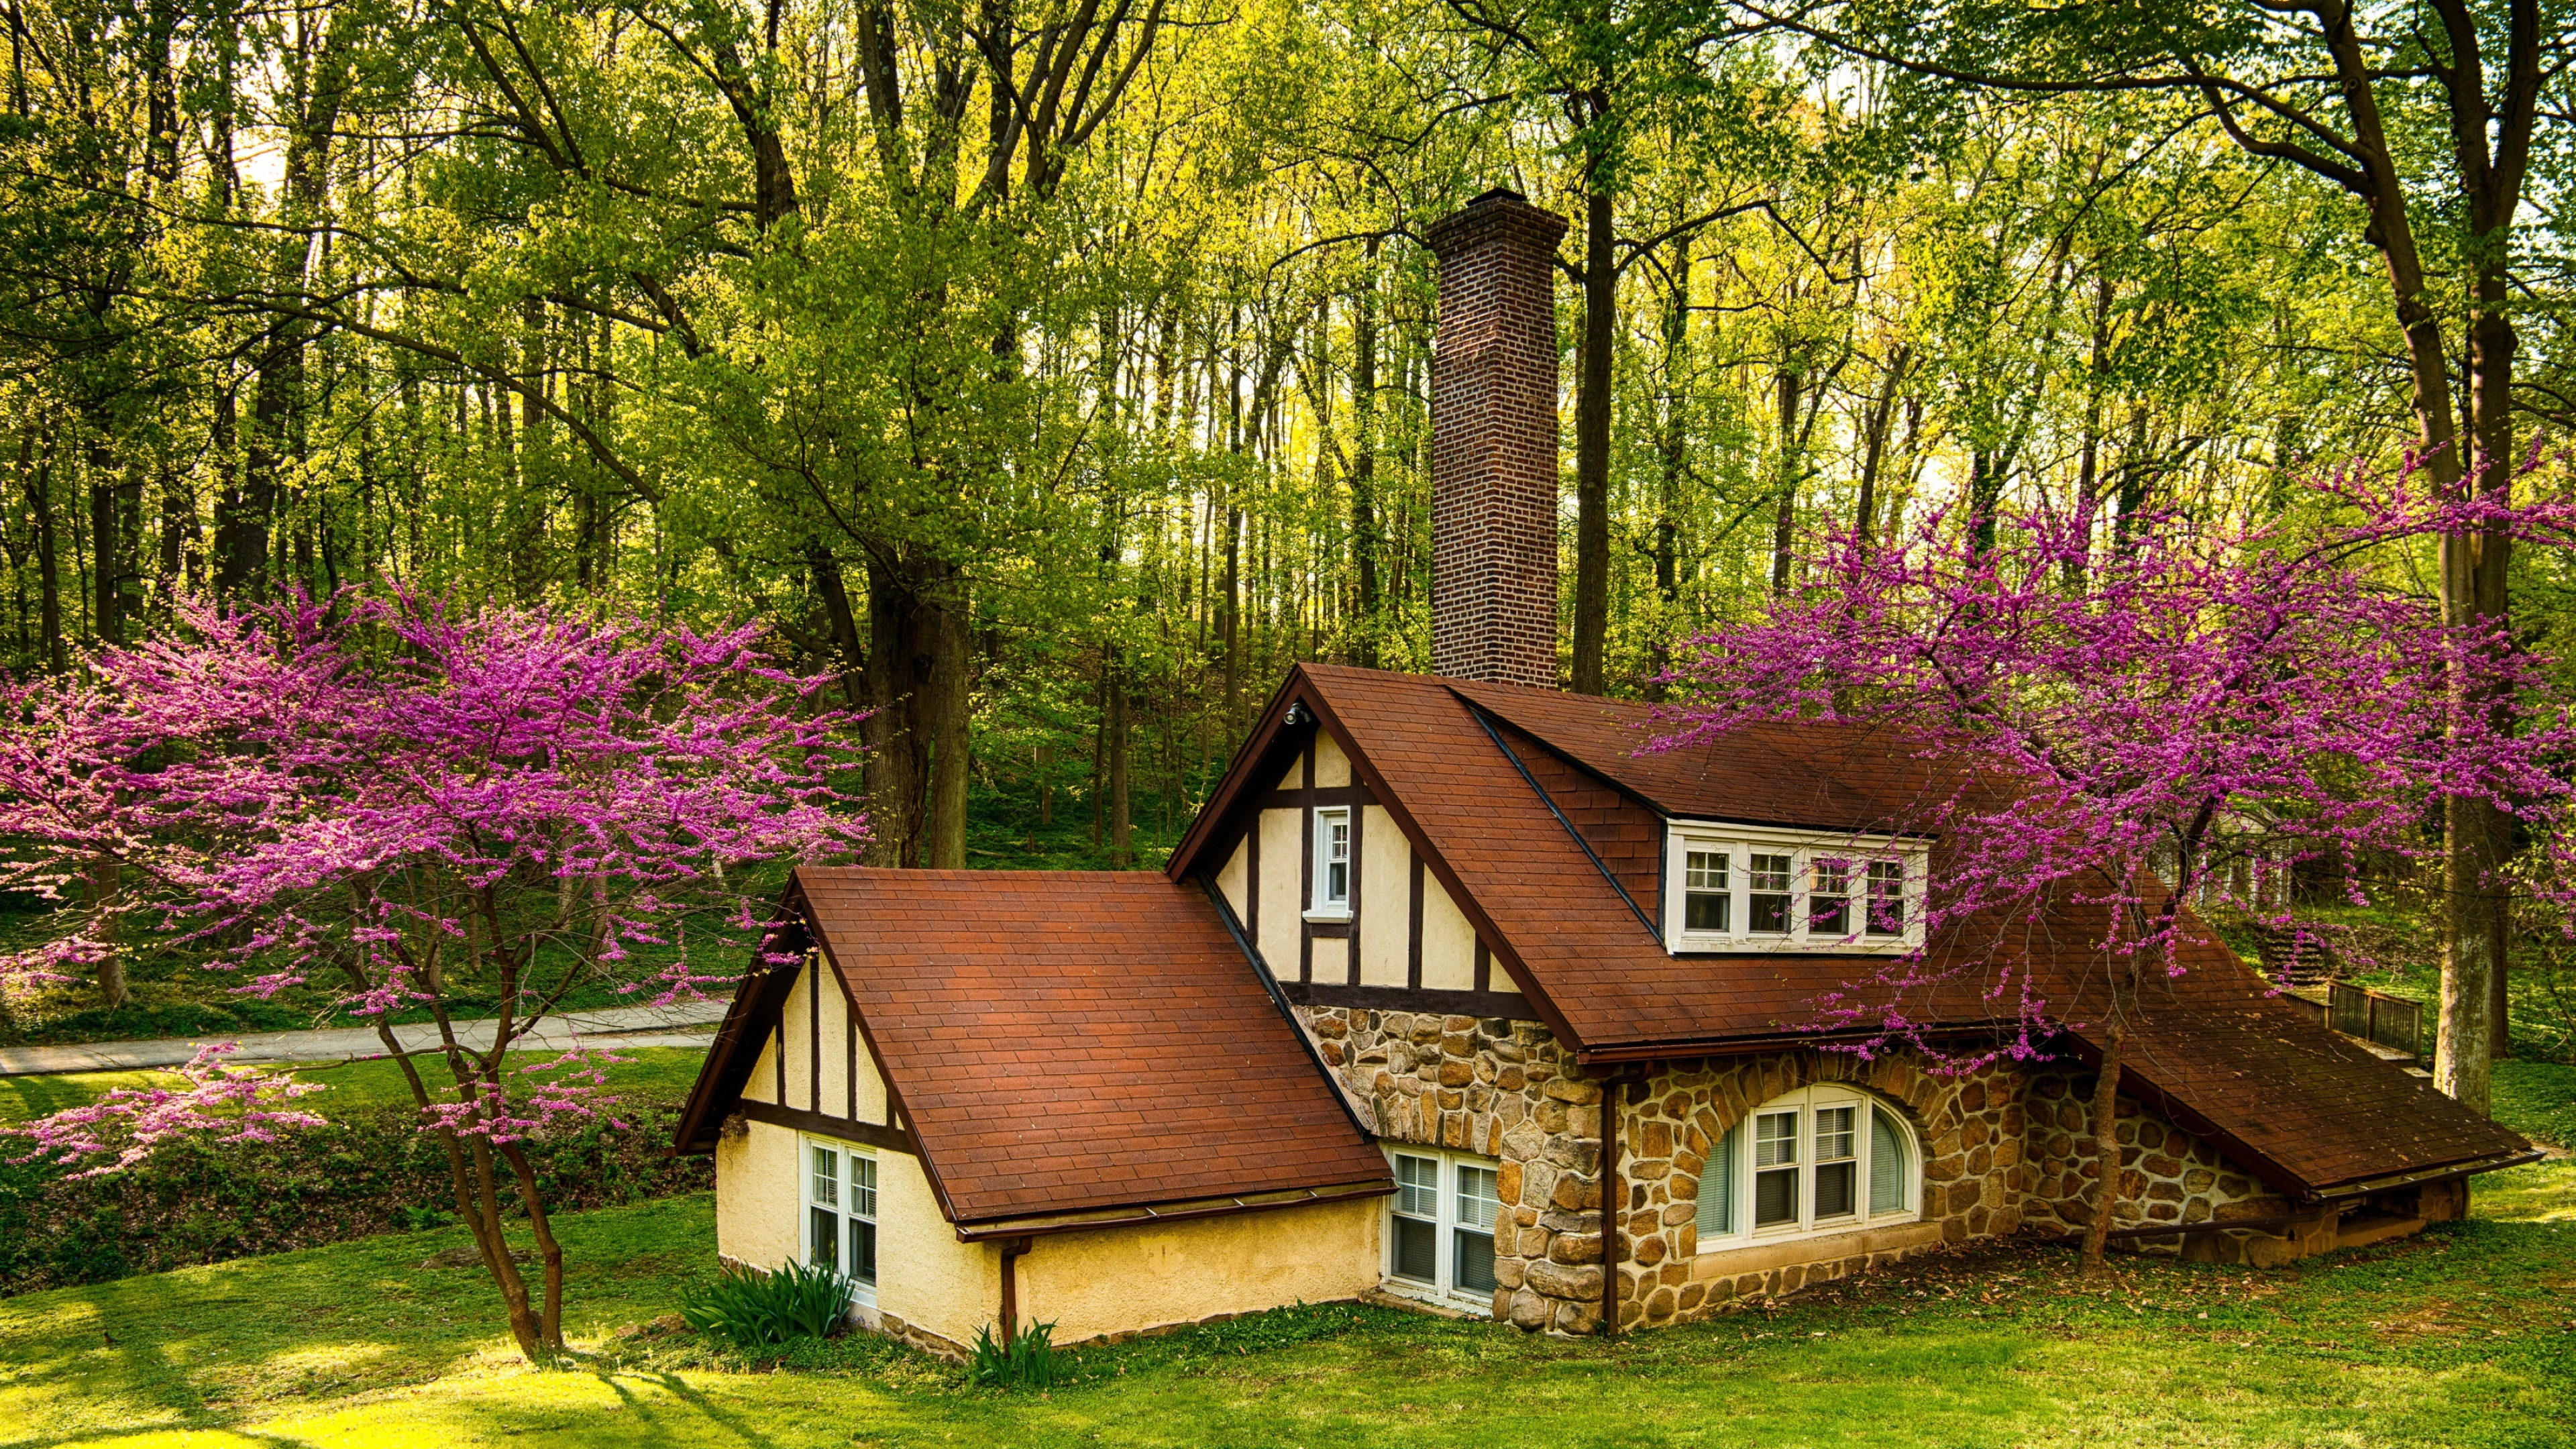 Country house, Beautiful backgrounds, Architectural grace, Home sweet home, 3840x2160 4K Desktop